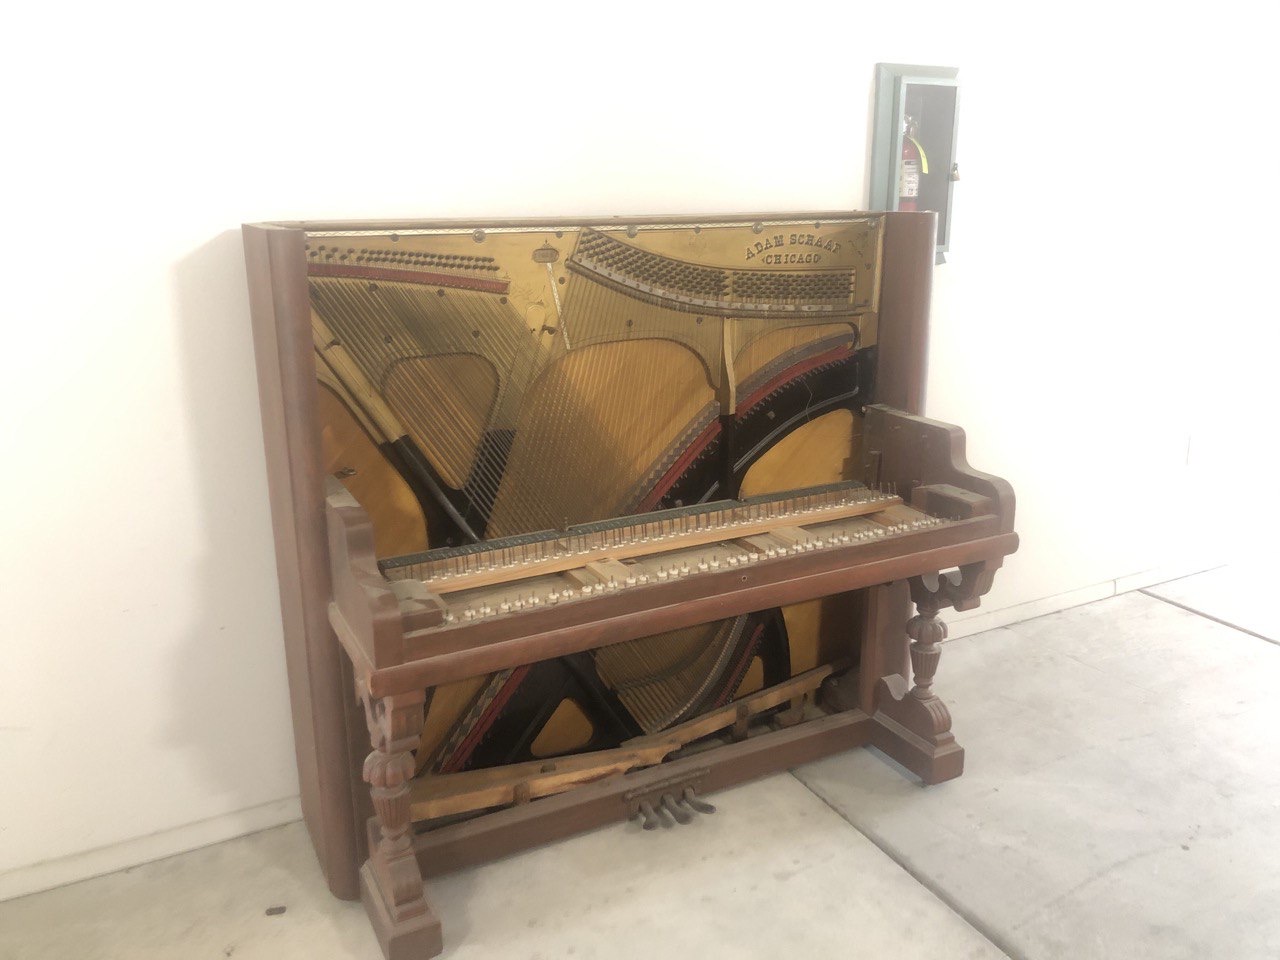 Piano from last tenant - been here 8 months